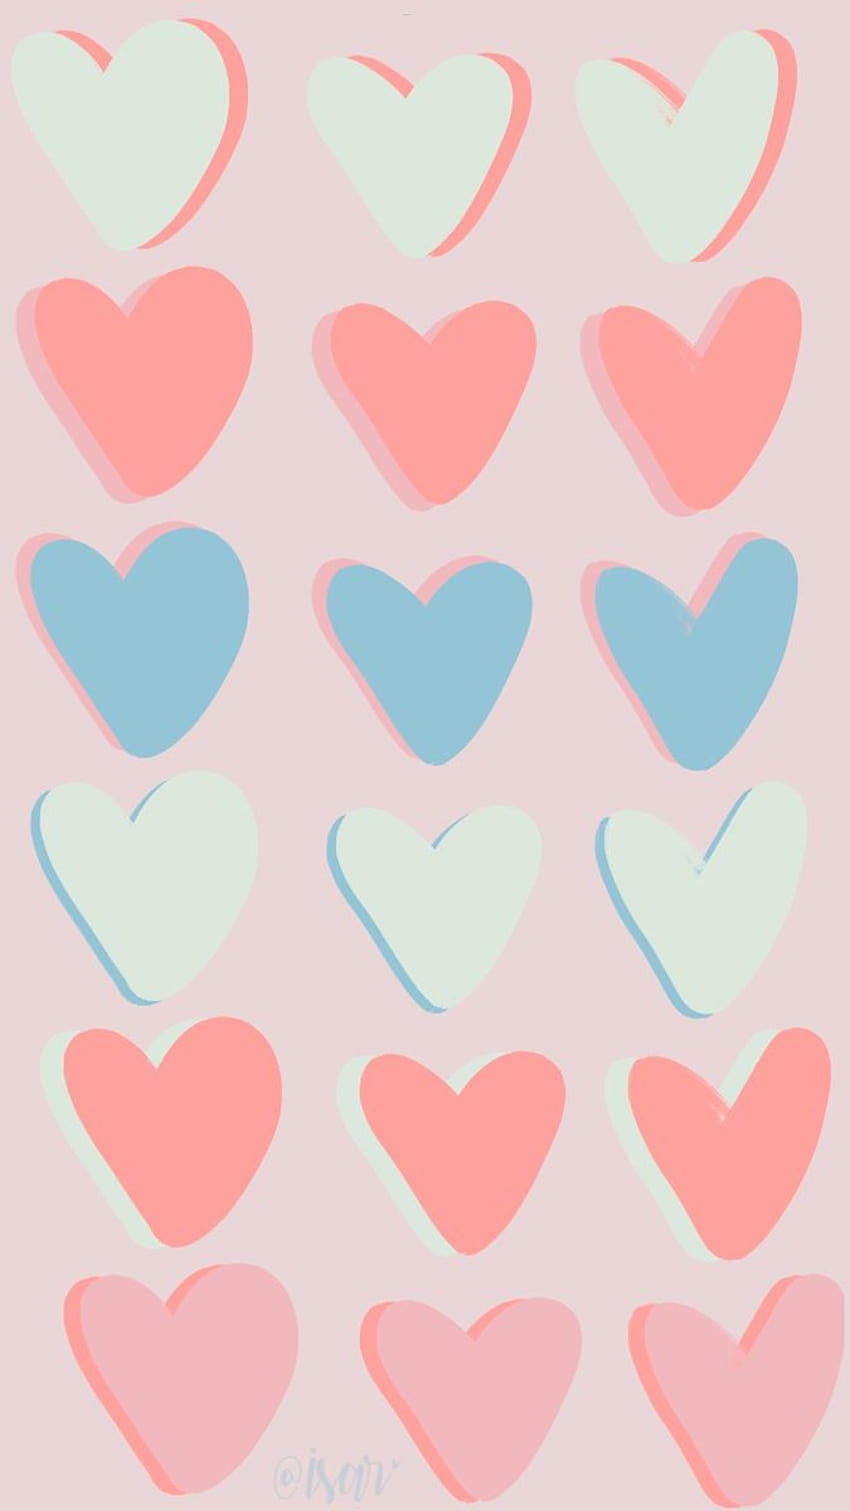 Pieces of ❤️, pink heart aesthetic iphone HD phone wallpaper